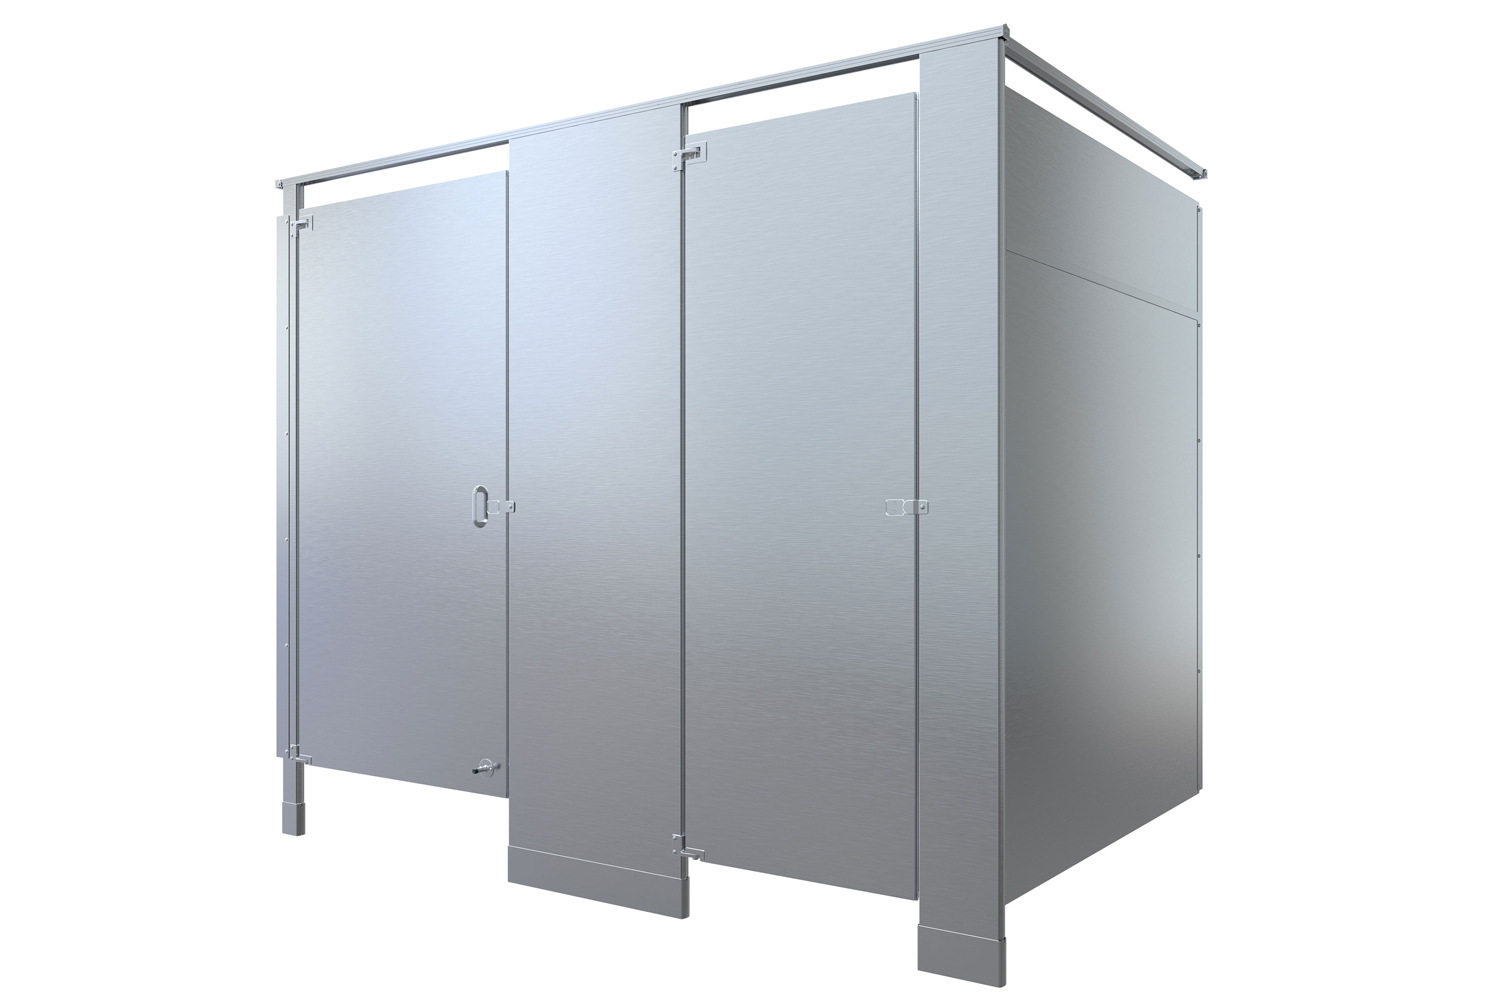 Bradley Corporation launched the Mills privacy partitions for restroom 